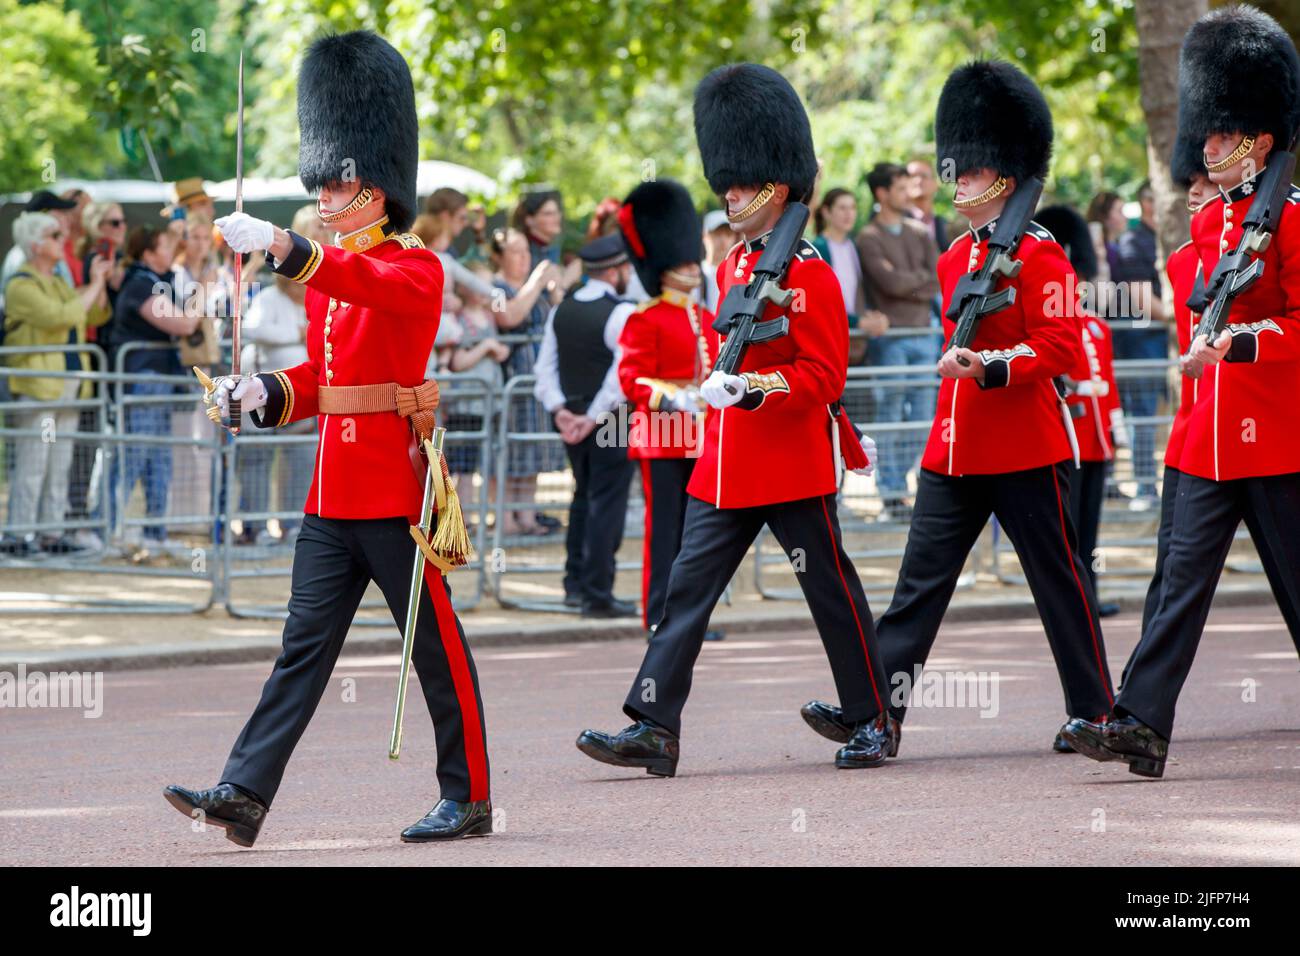 Leutnant leitet die Coldstream Guards bei Trooping the Color, Colonel’s Review in der Mall, London, England, Großbritannien, am Samstag, den 28. Mai 2022 Stockfoto